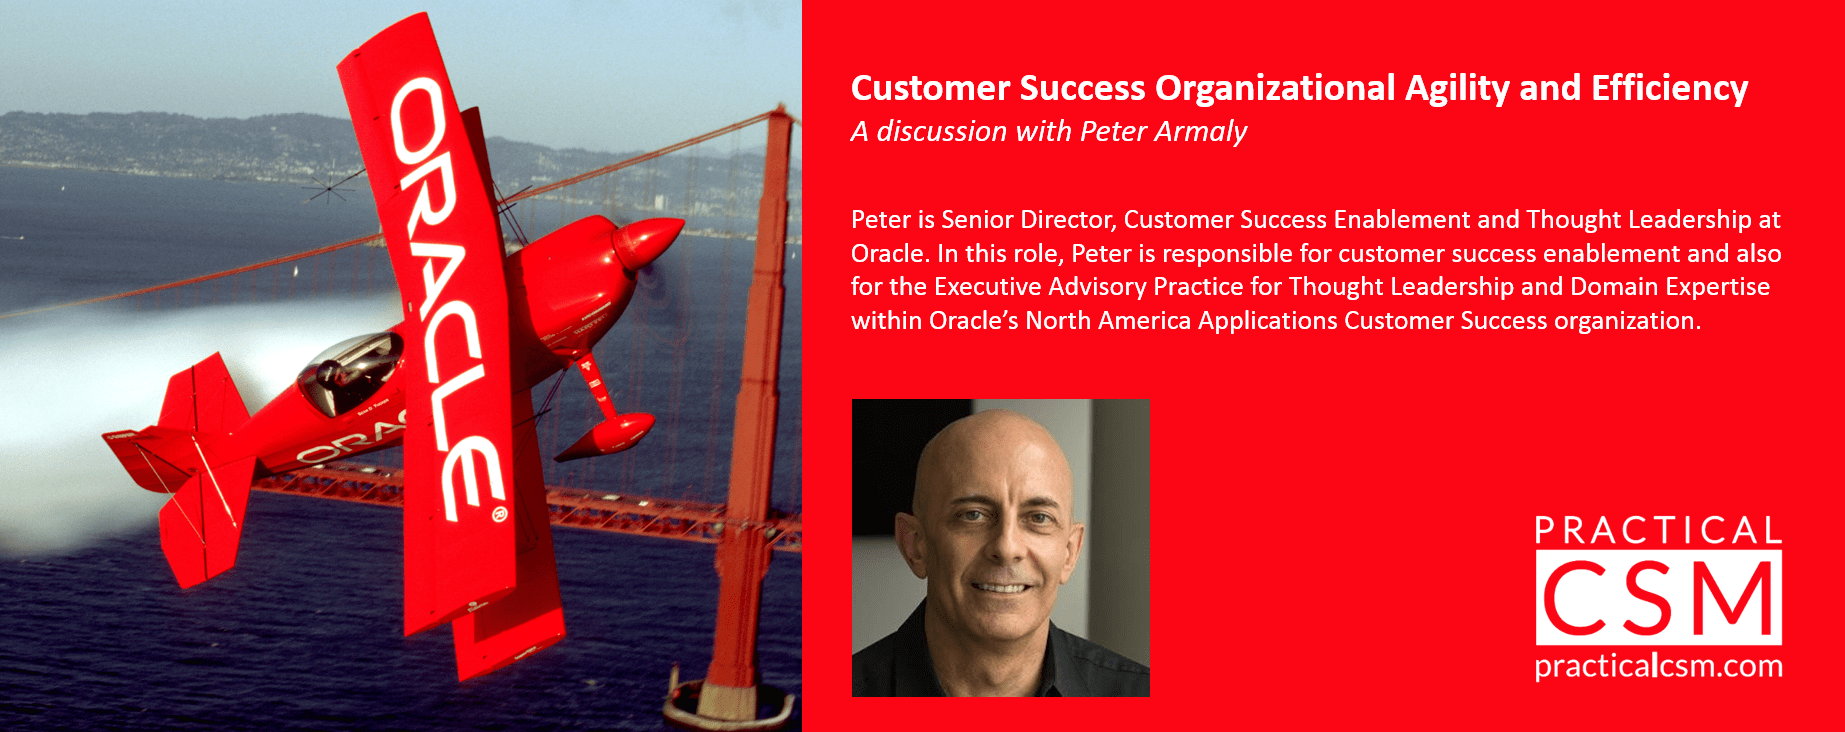 Practical CSM Customer Success Organizational Agility and Efficiency with Peter Armaly